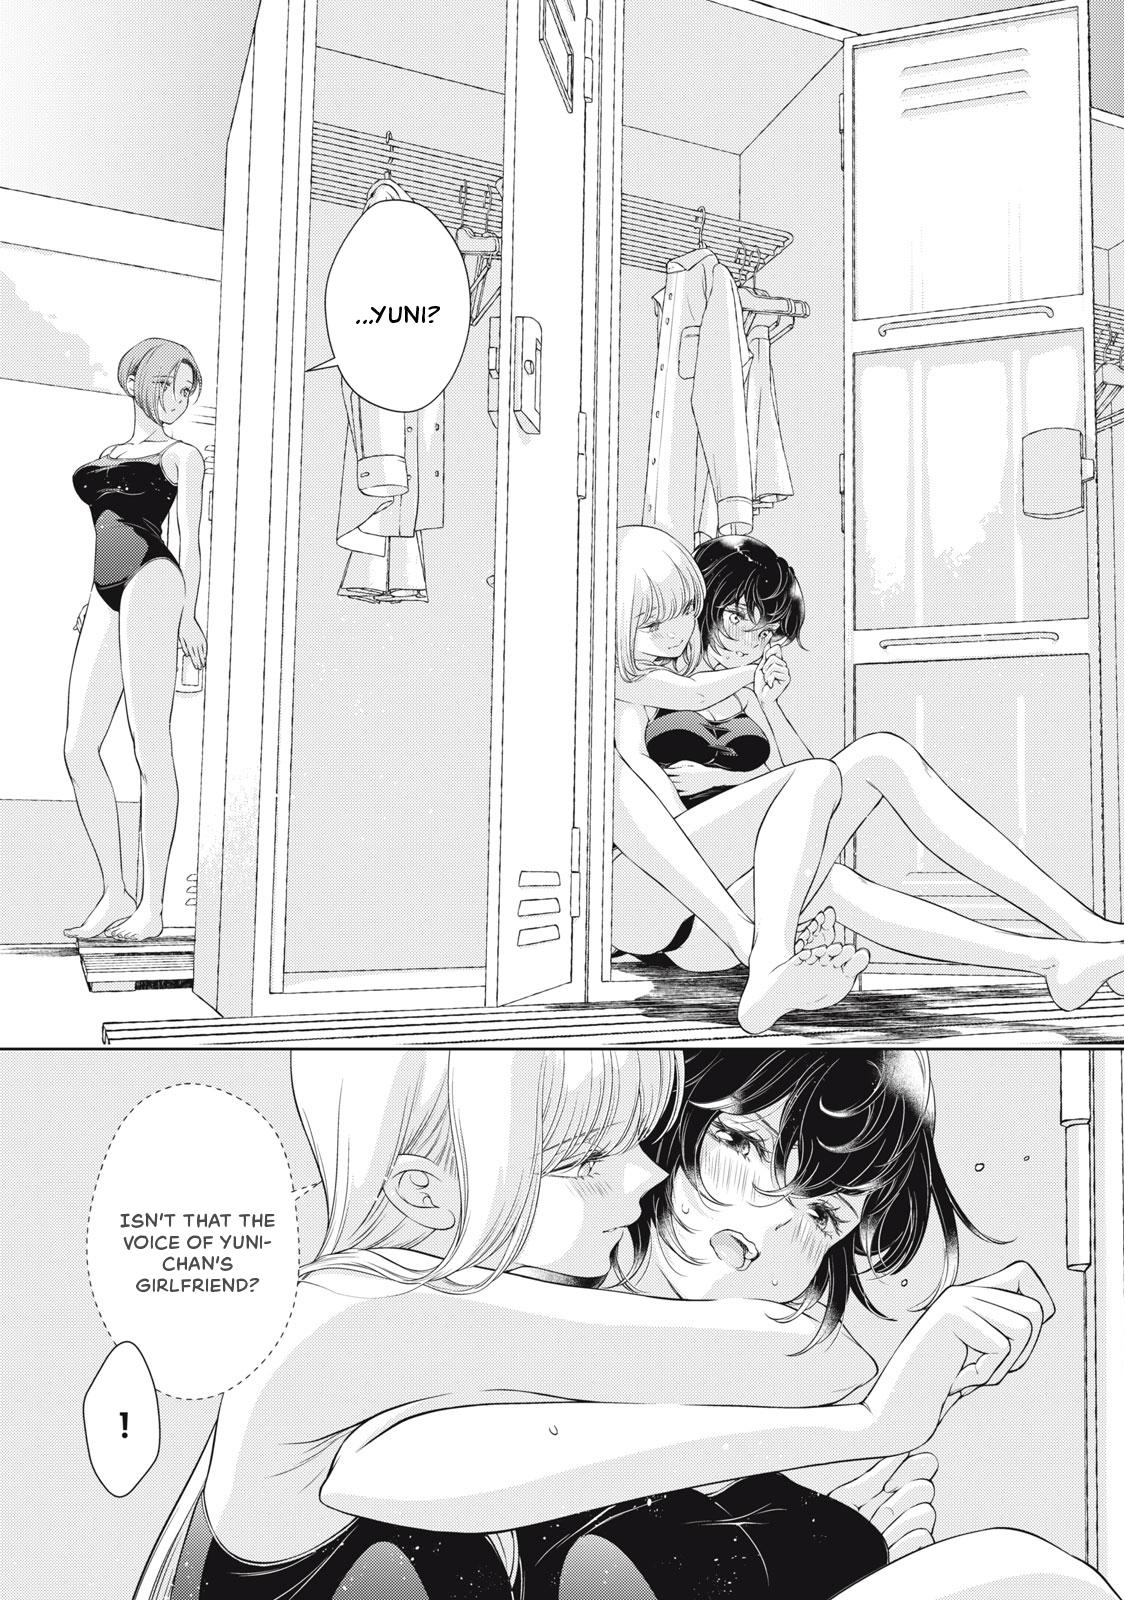 My Girlfriend’S Not Here Today - chapter 12.5 - #6